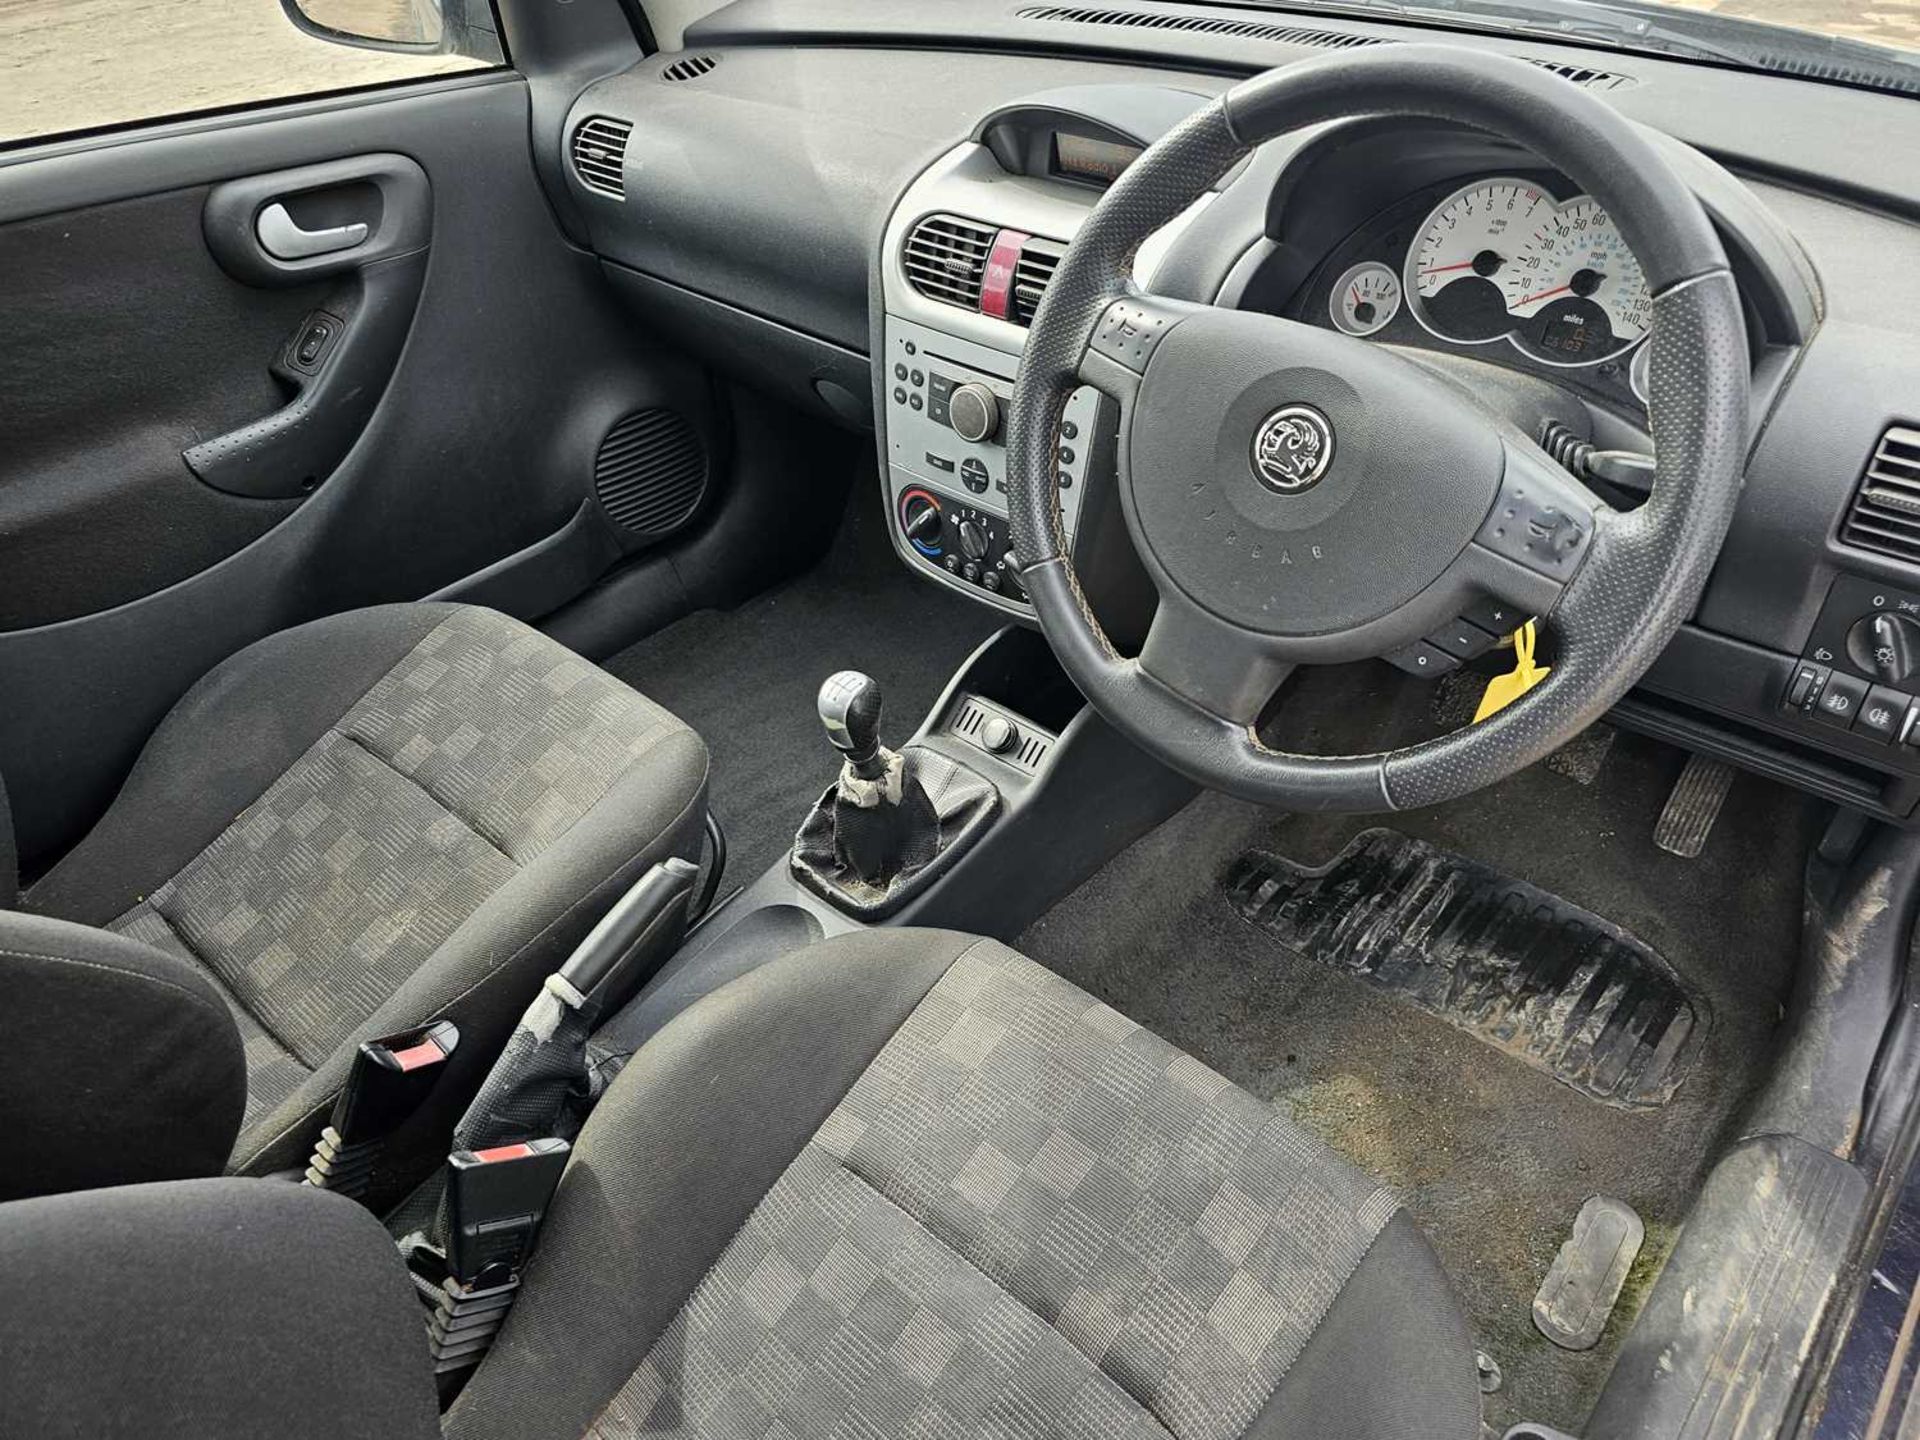 2005 Vauxhall Corsa SXi, 5 Speed, A/C (Reg. Docs. Available) - Image 19 of 24